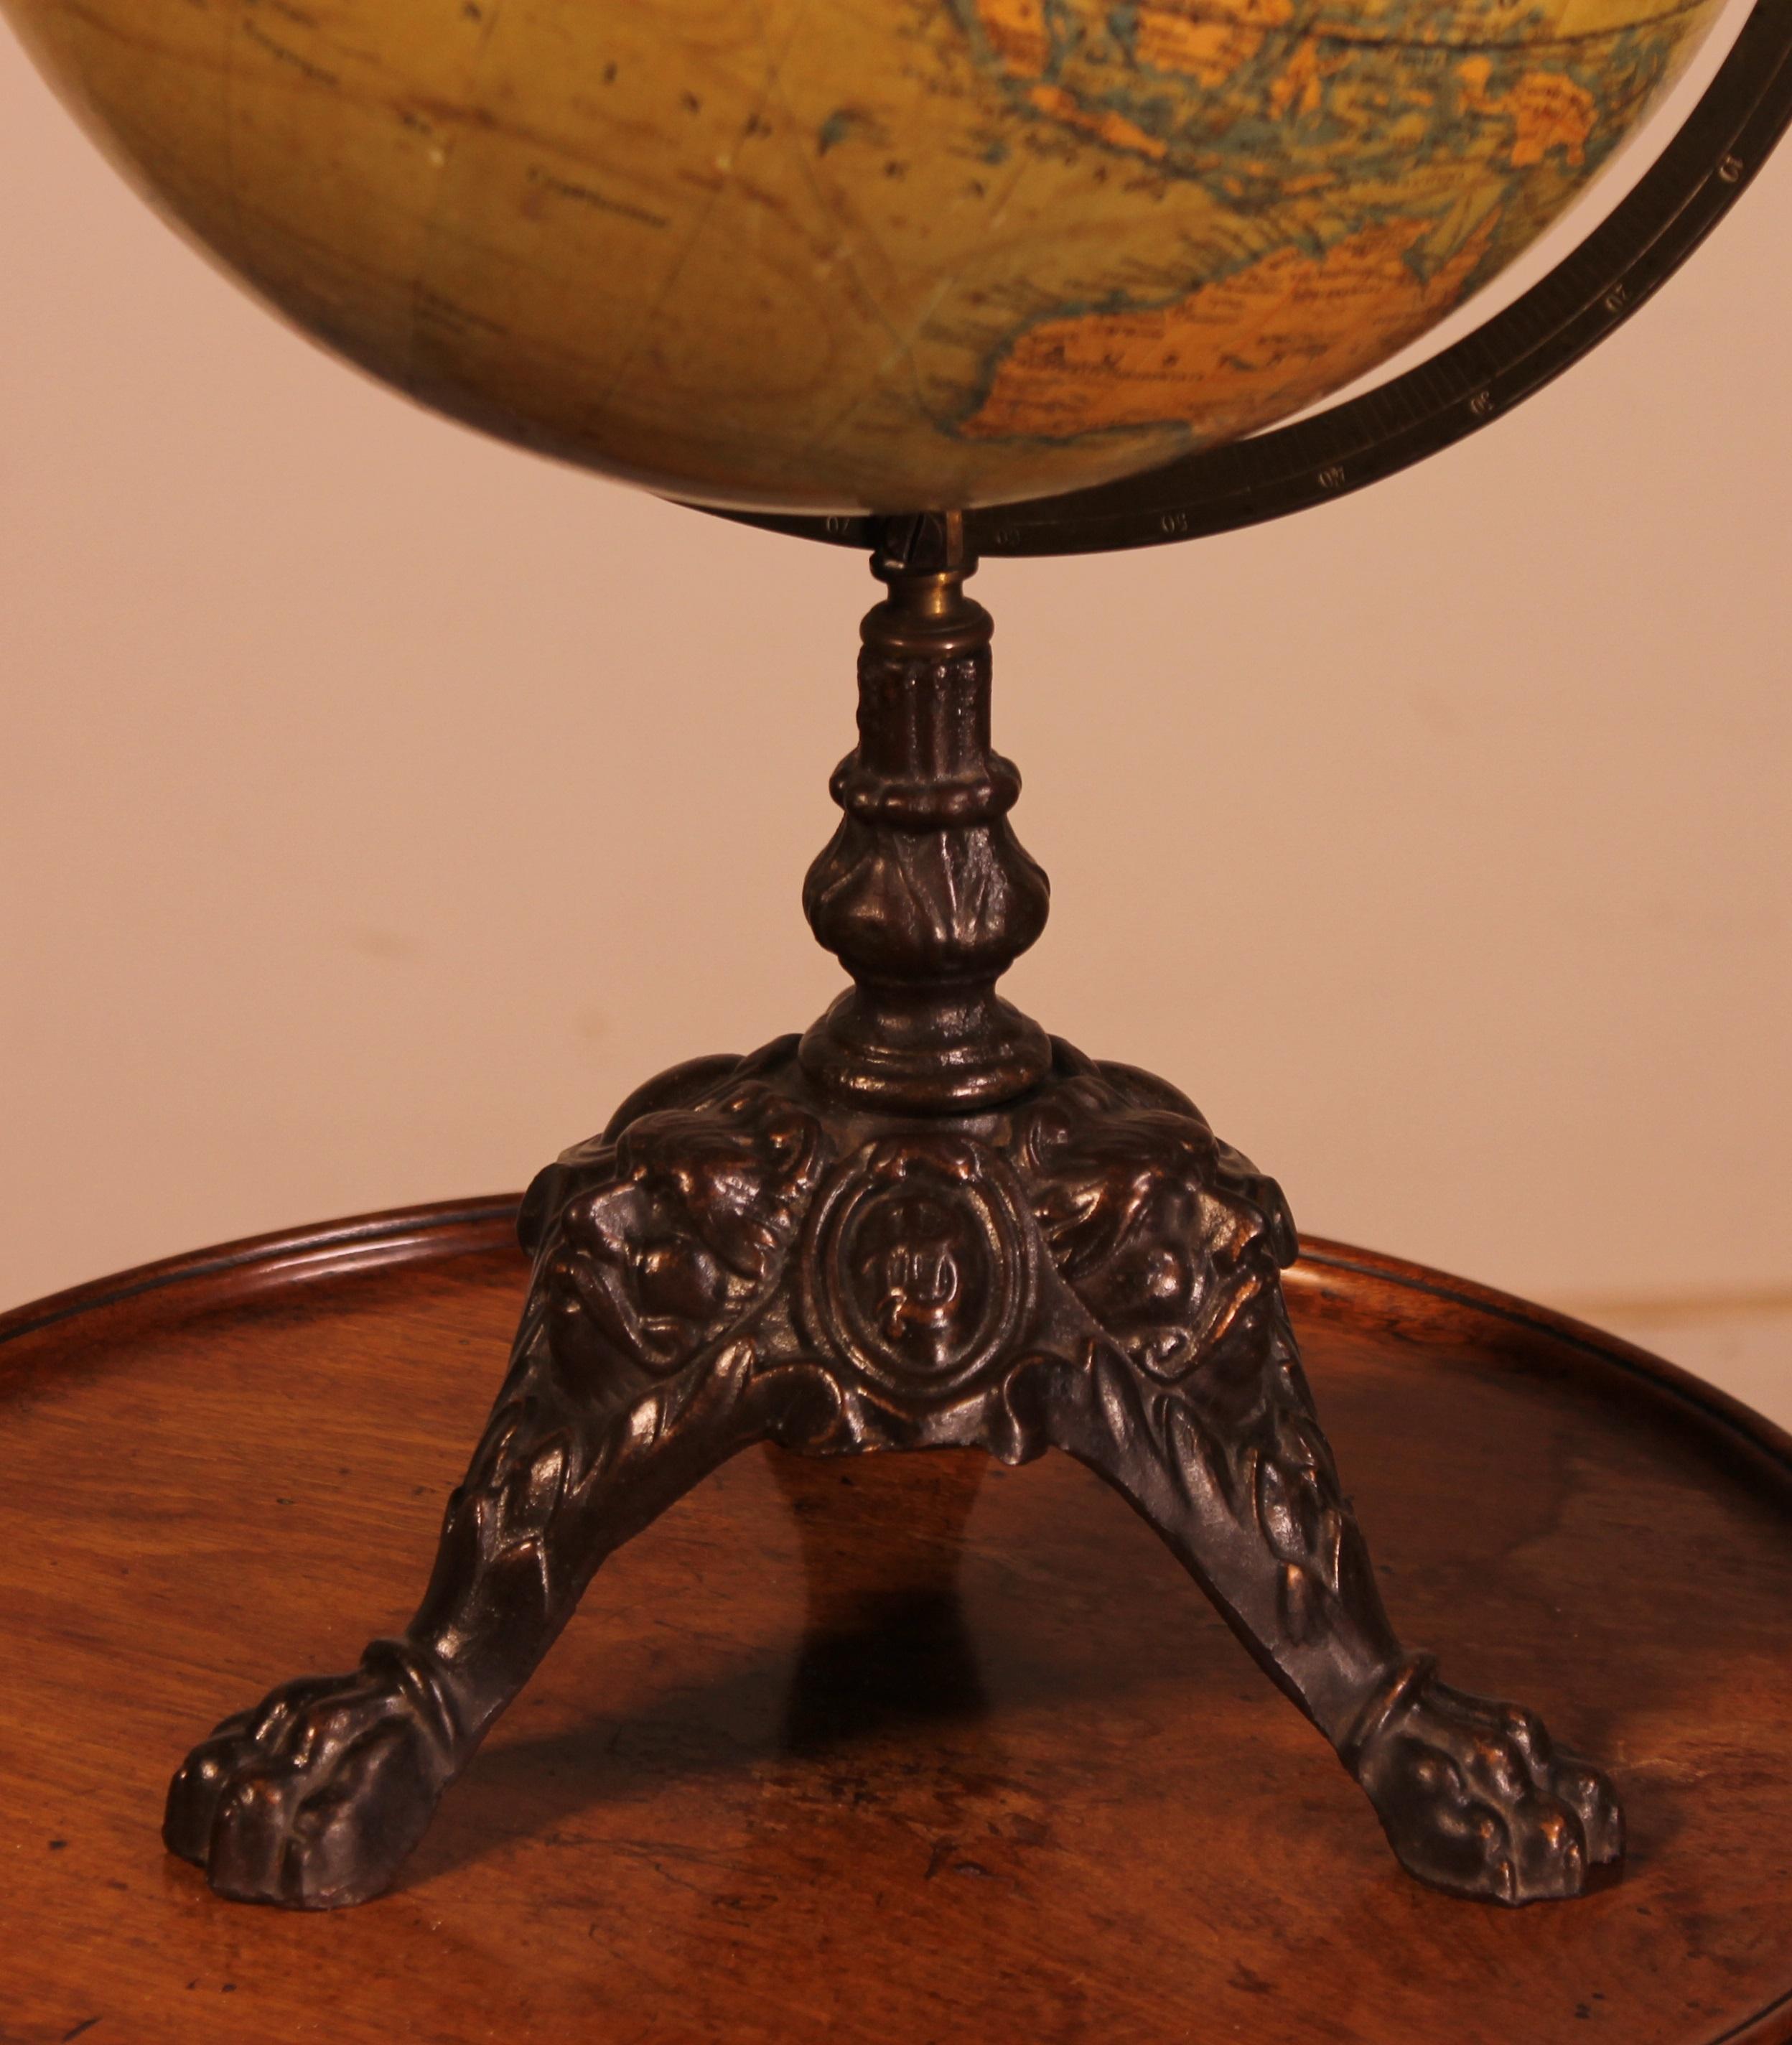 Elegant Terrestial Globe J.Lebègue & Cie with its cast iron base representing characters and lion claws.
This beautiful globe is from the publisher J.Lebègue & Cie located at 30 Rue de Lille in Paris and from then end of the 19th century
We can